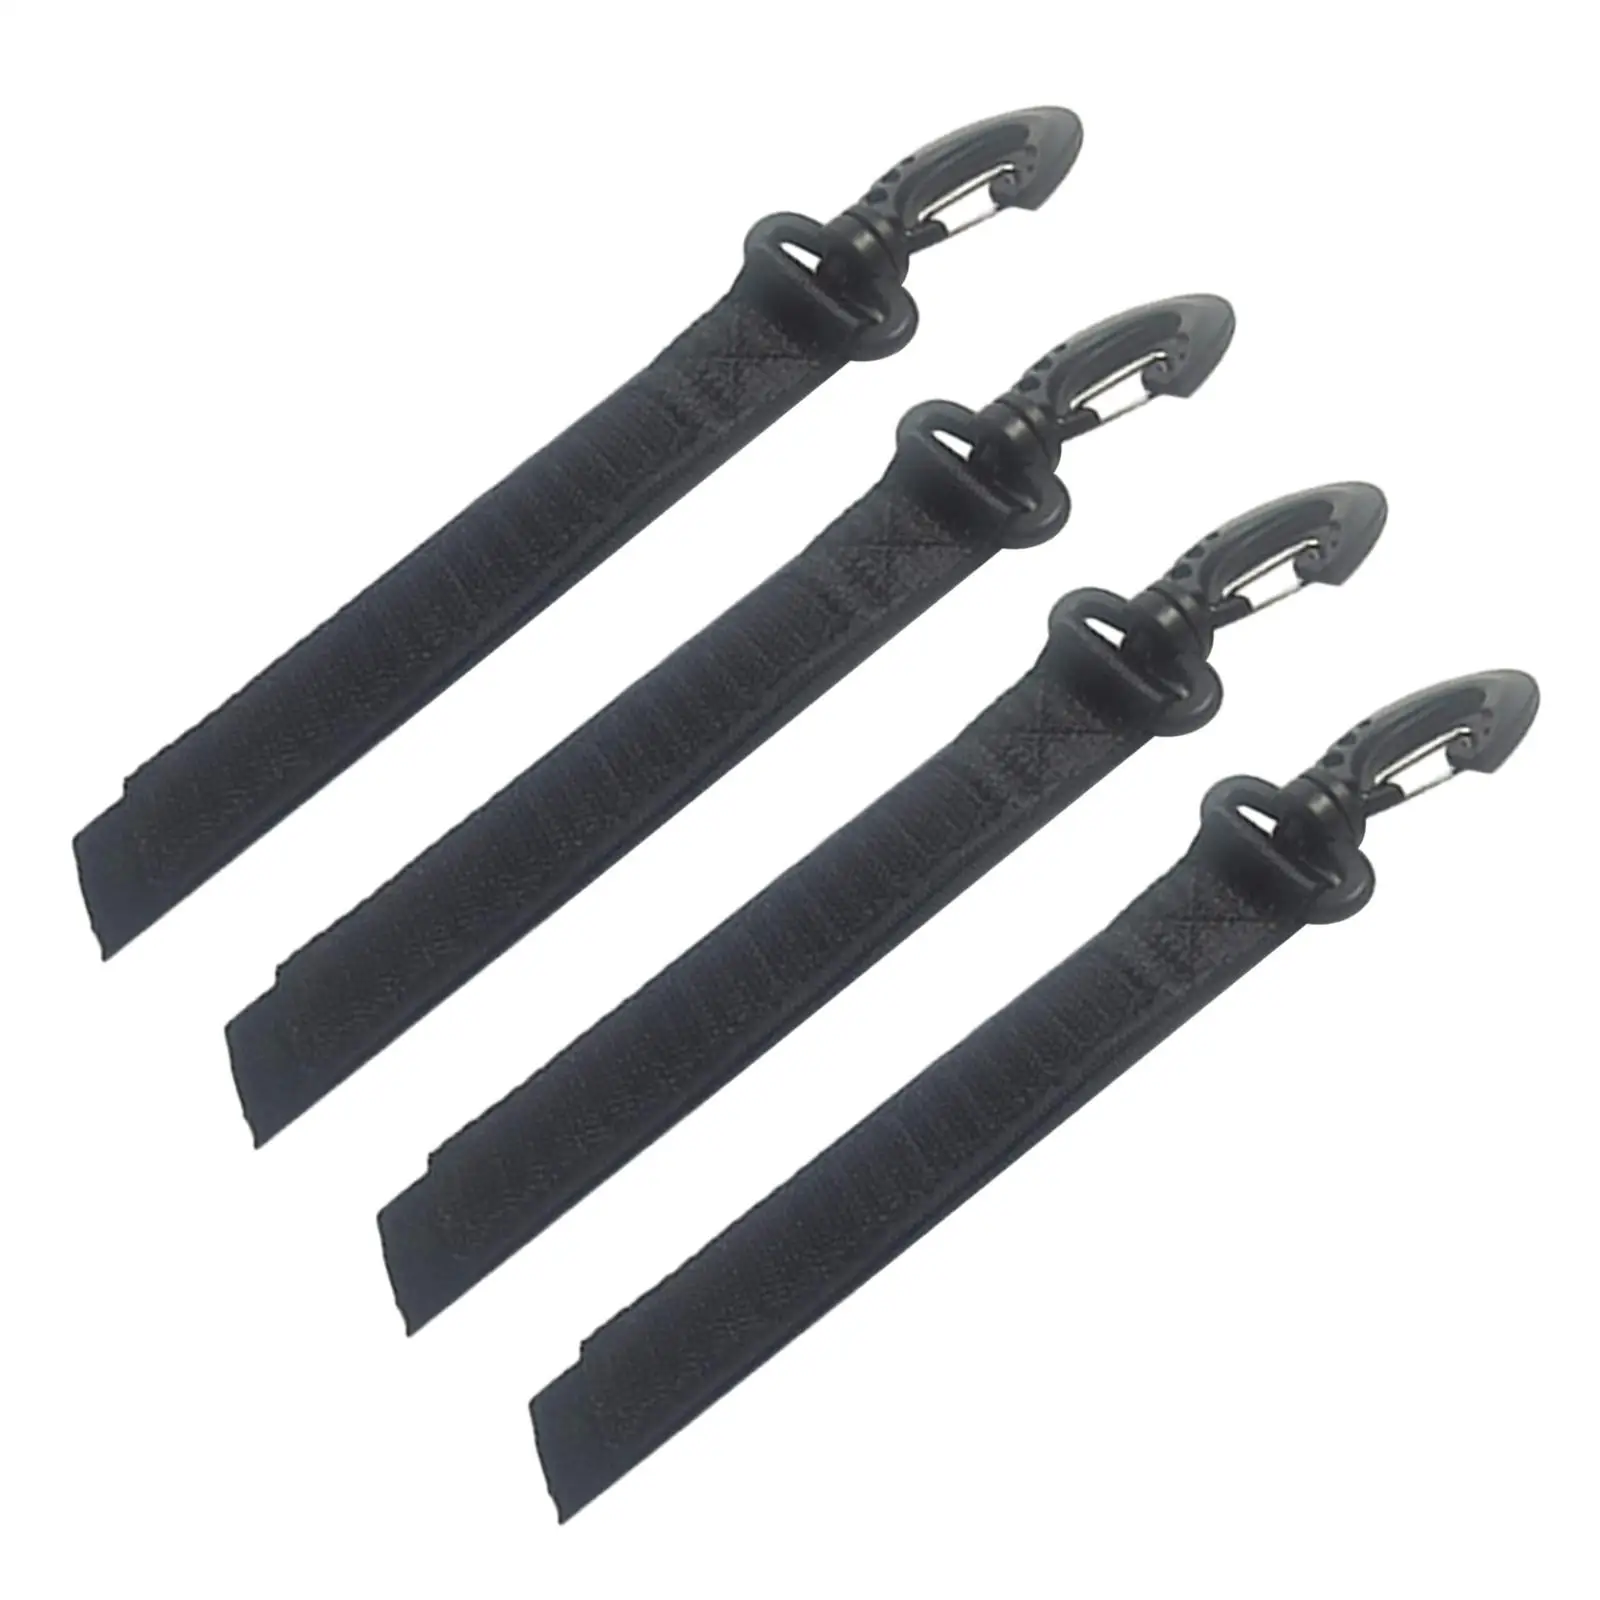 4Pcs Kayak Paddle Holder Strap Anti Lost Fishing Rod Storage for Stand up Paddle Board Garage Marine Rowing Inflatable Boat